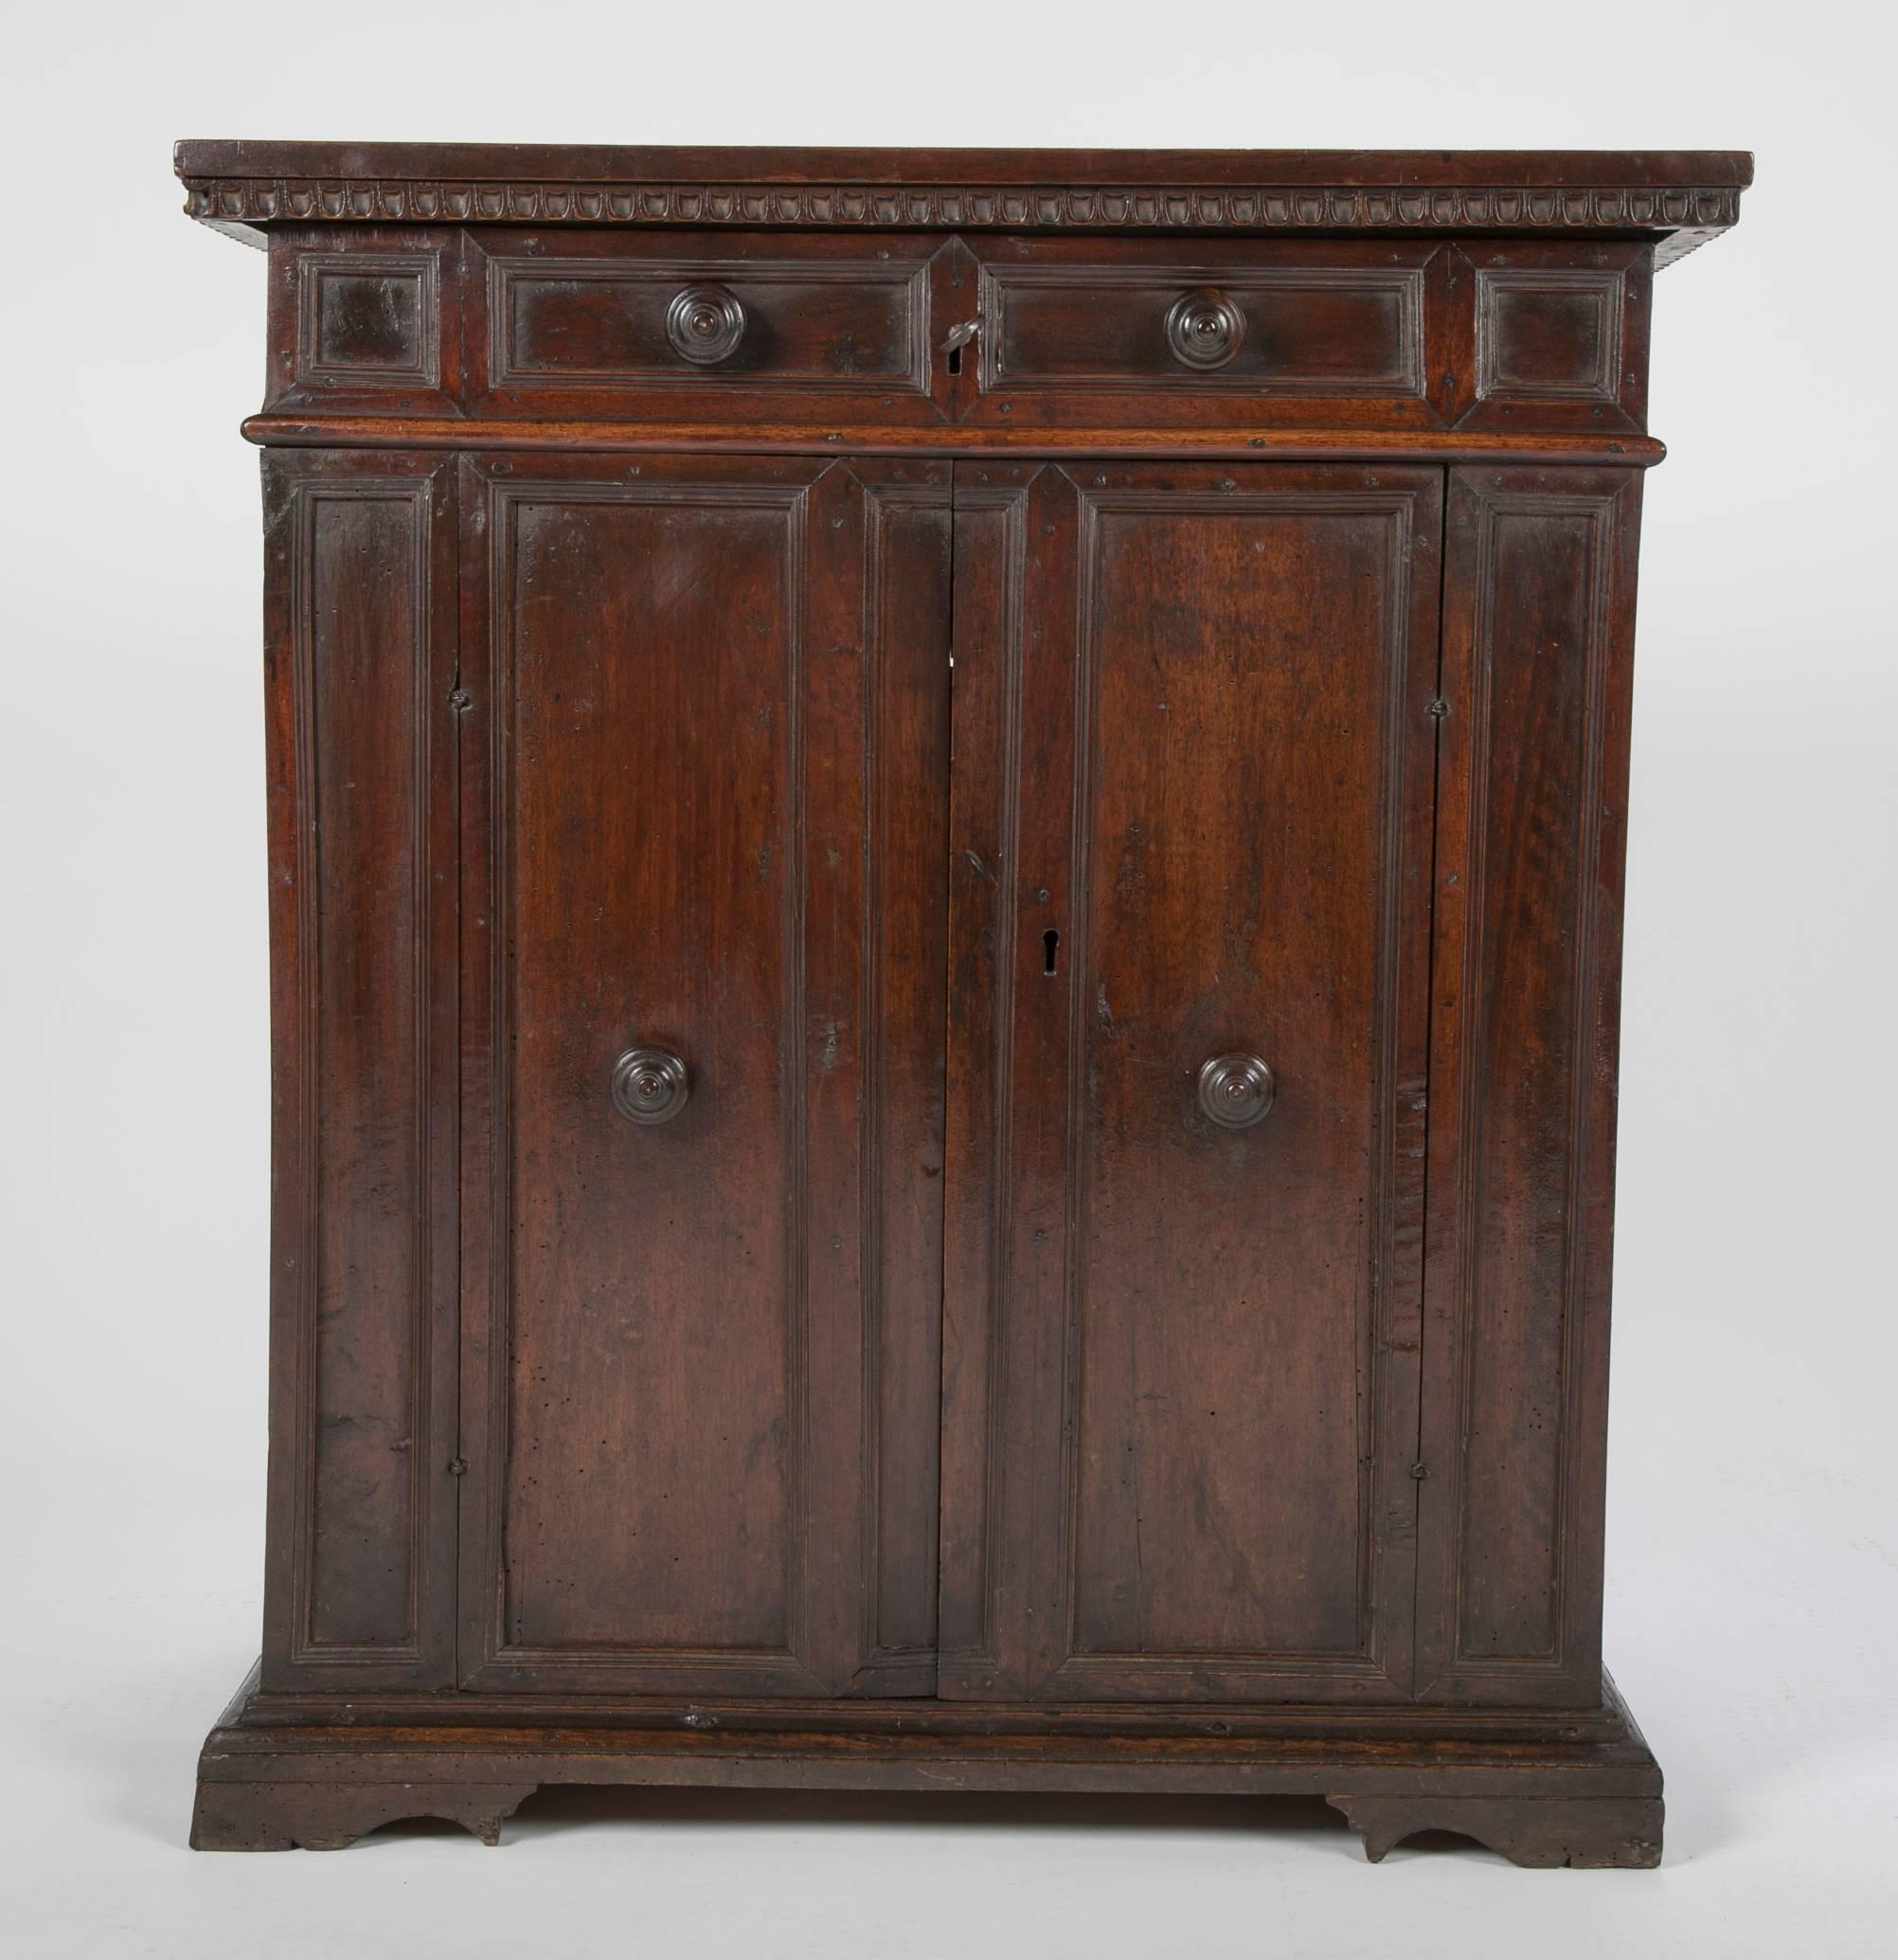 Italian 16th-17th century walnut credenza with unusual lift top with false drawer front. Retaining the original key that works both locks, and the original cotter-pin hinges. Classical form, warm and rich patina. A purists dream.